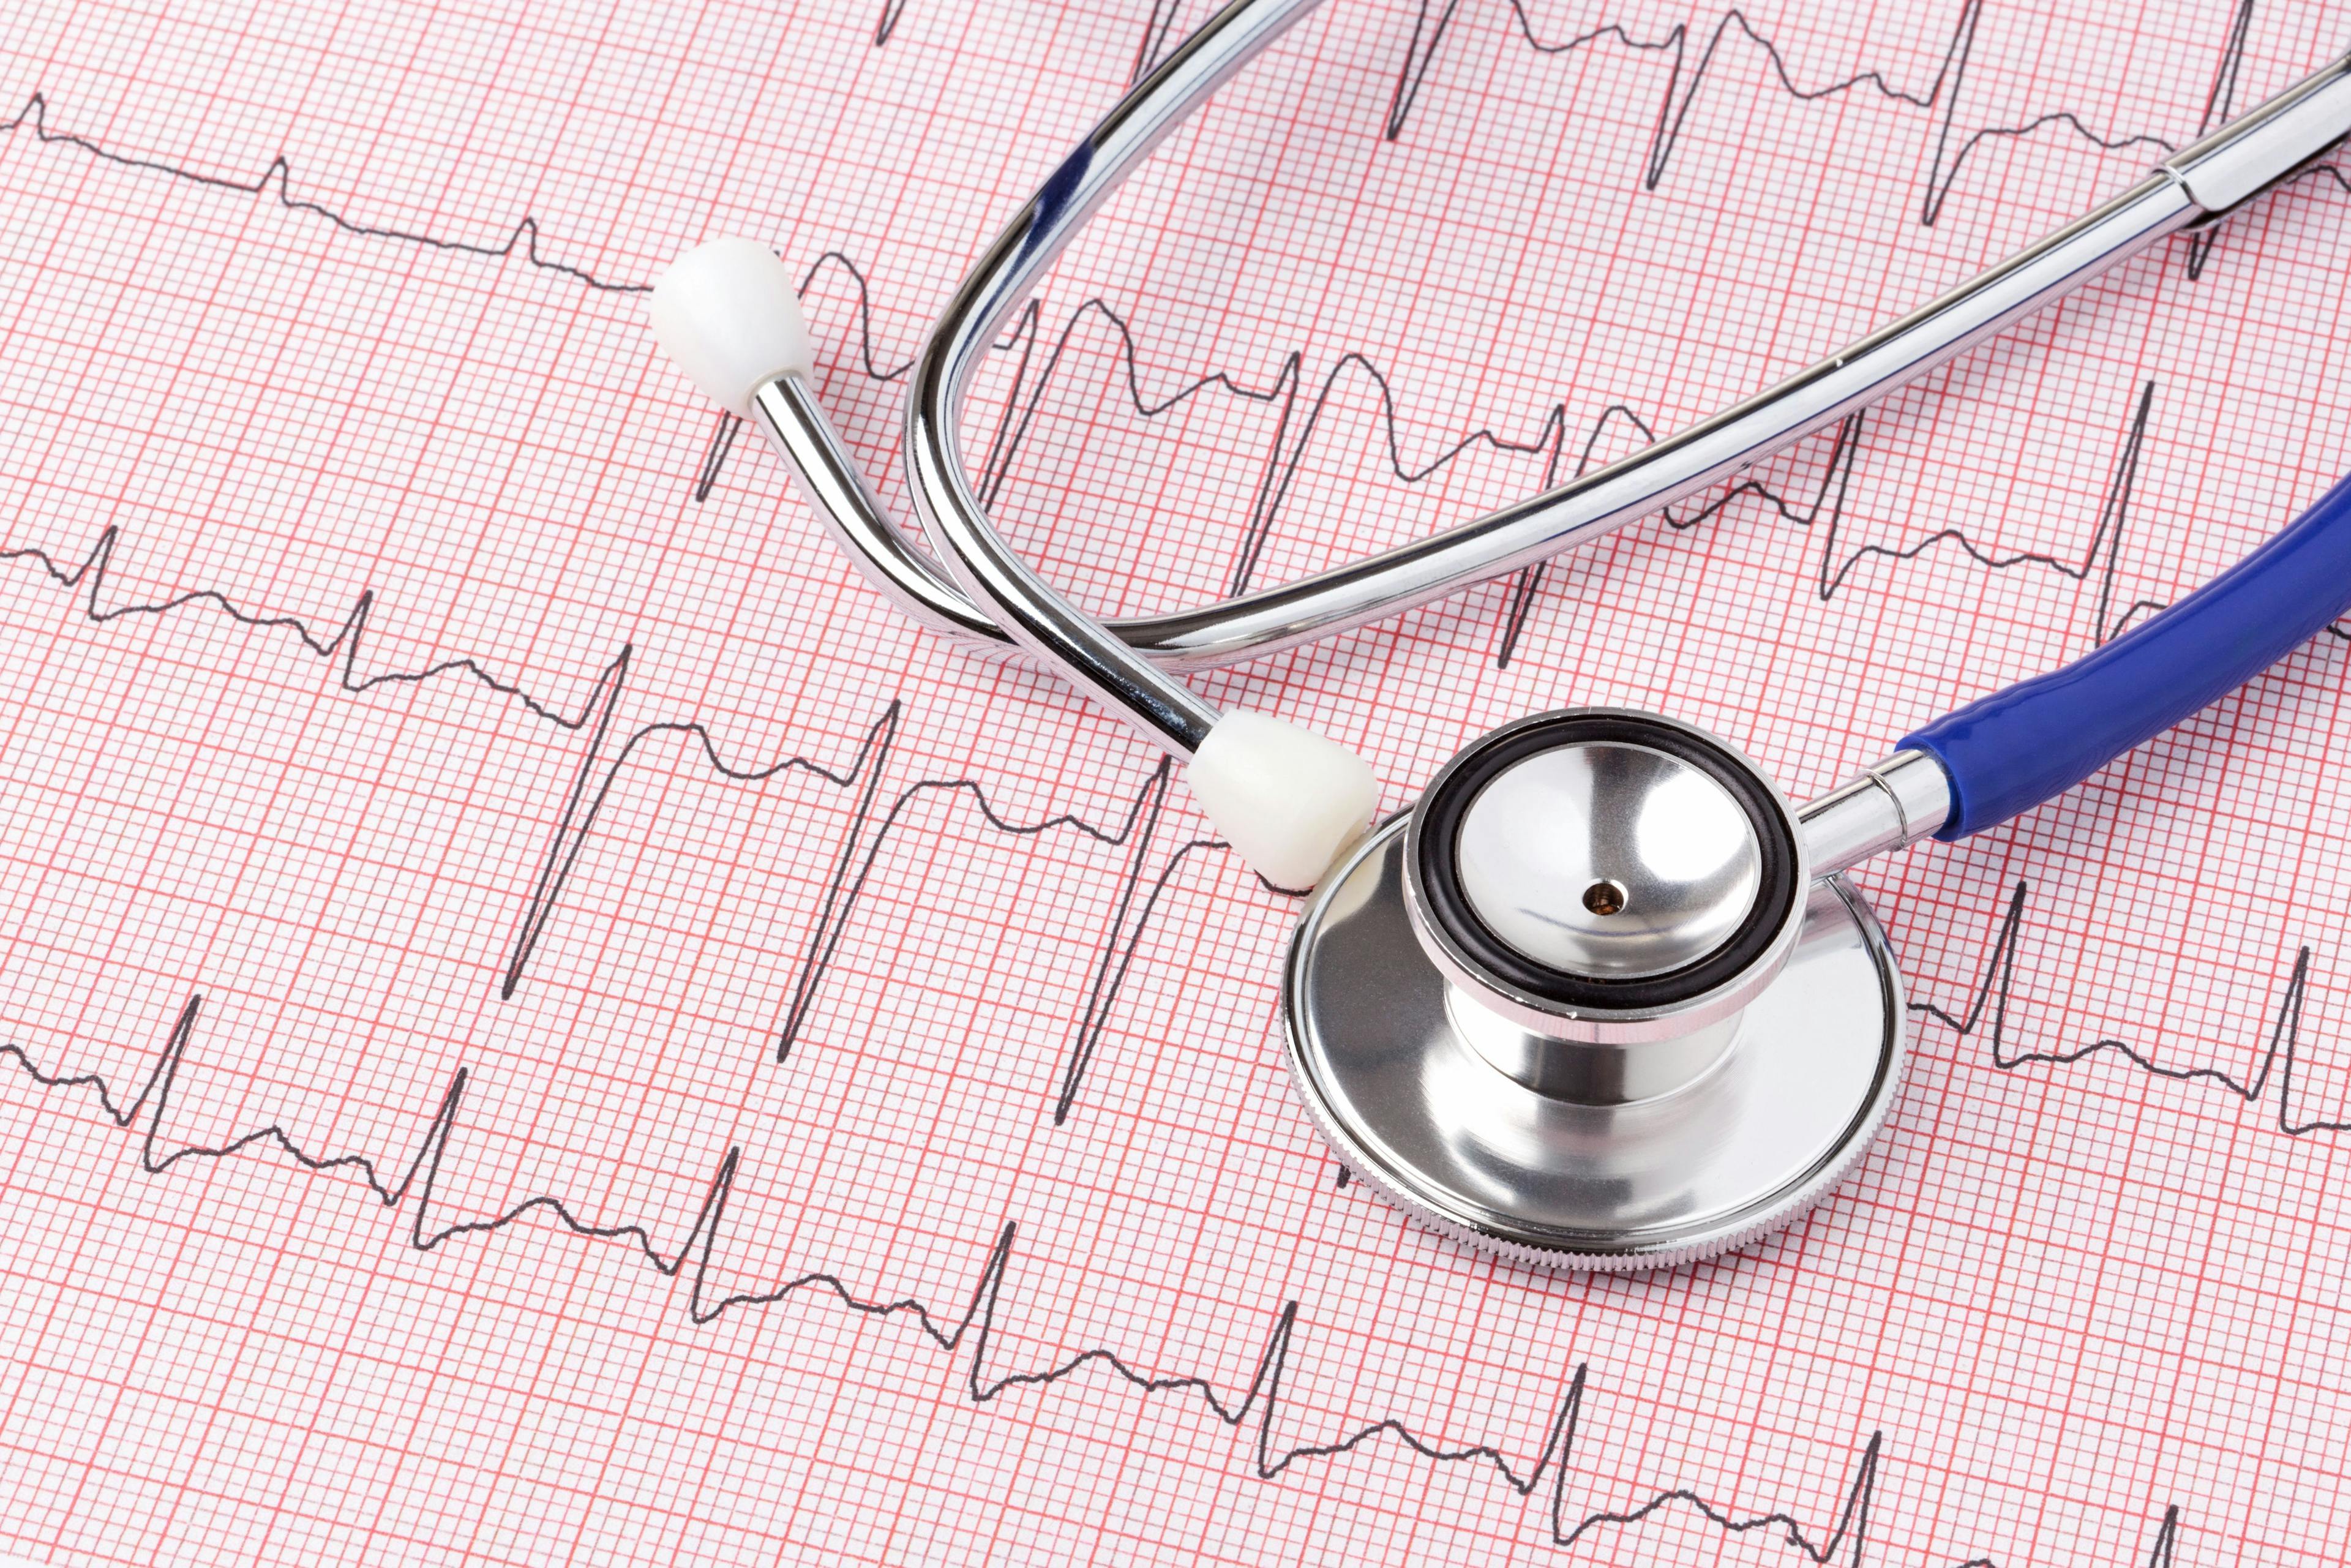 Close up of an EKG printout and a stethoscope